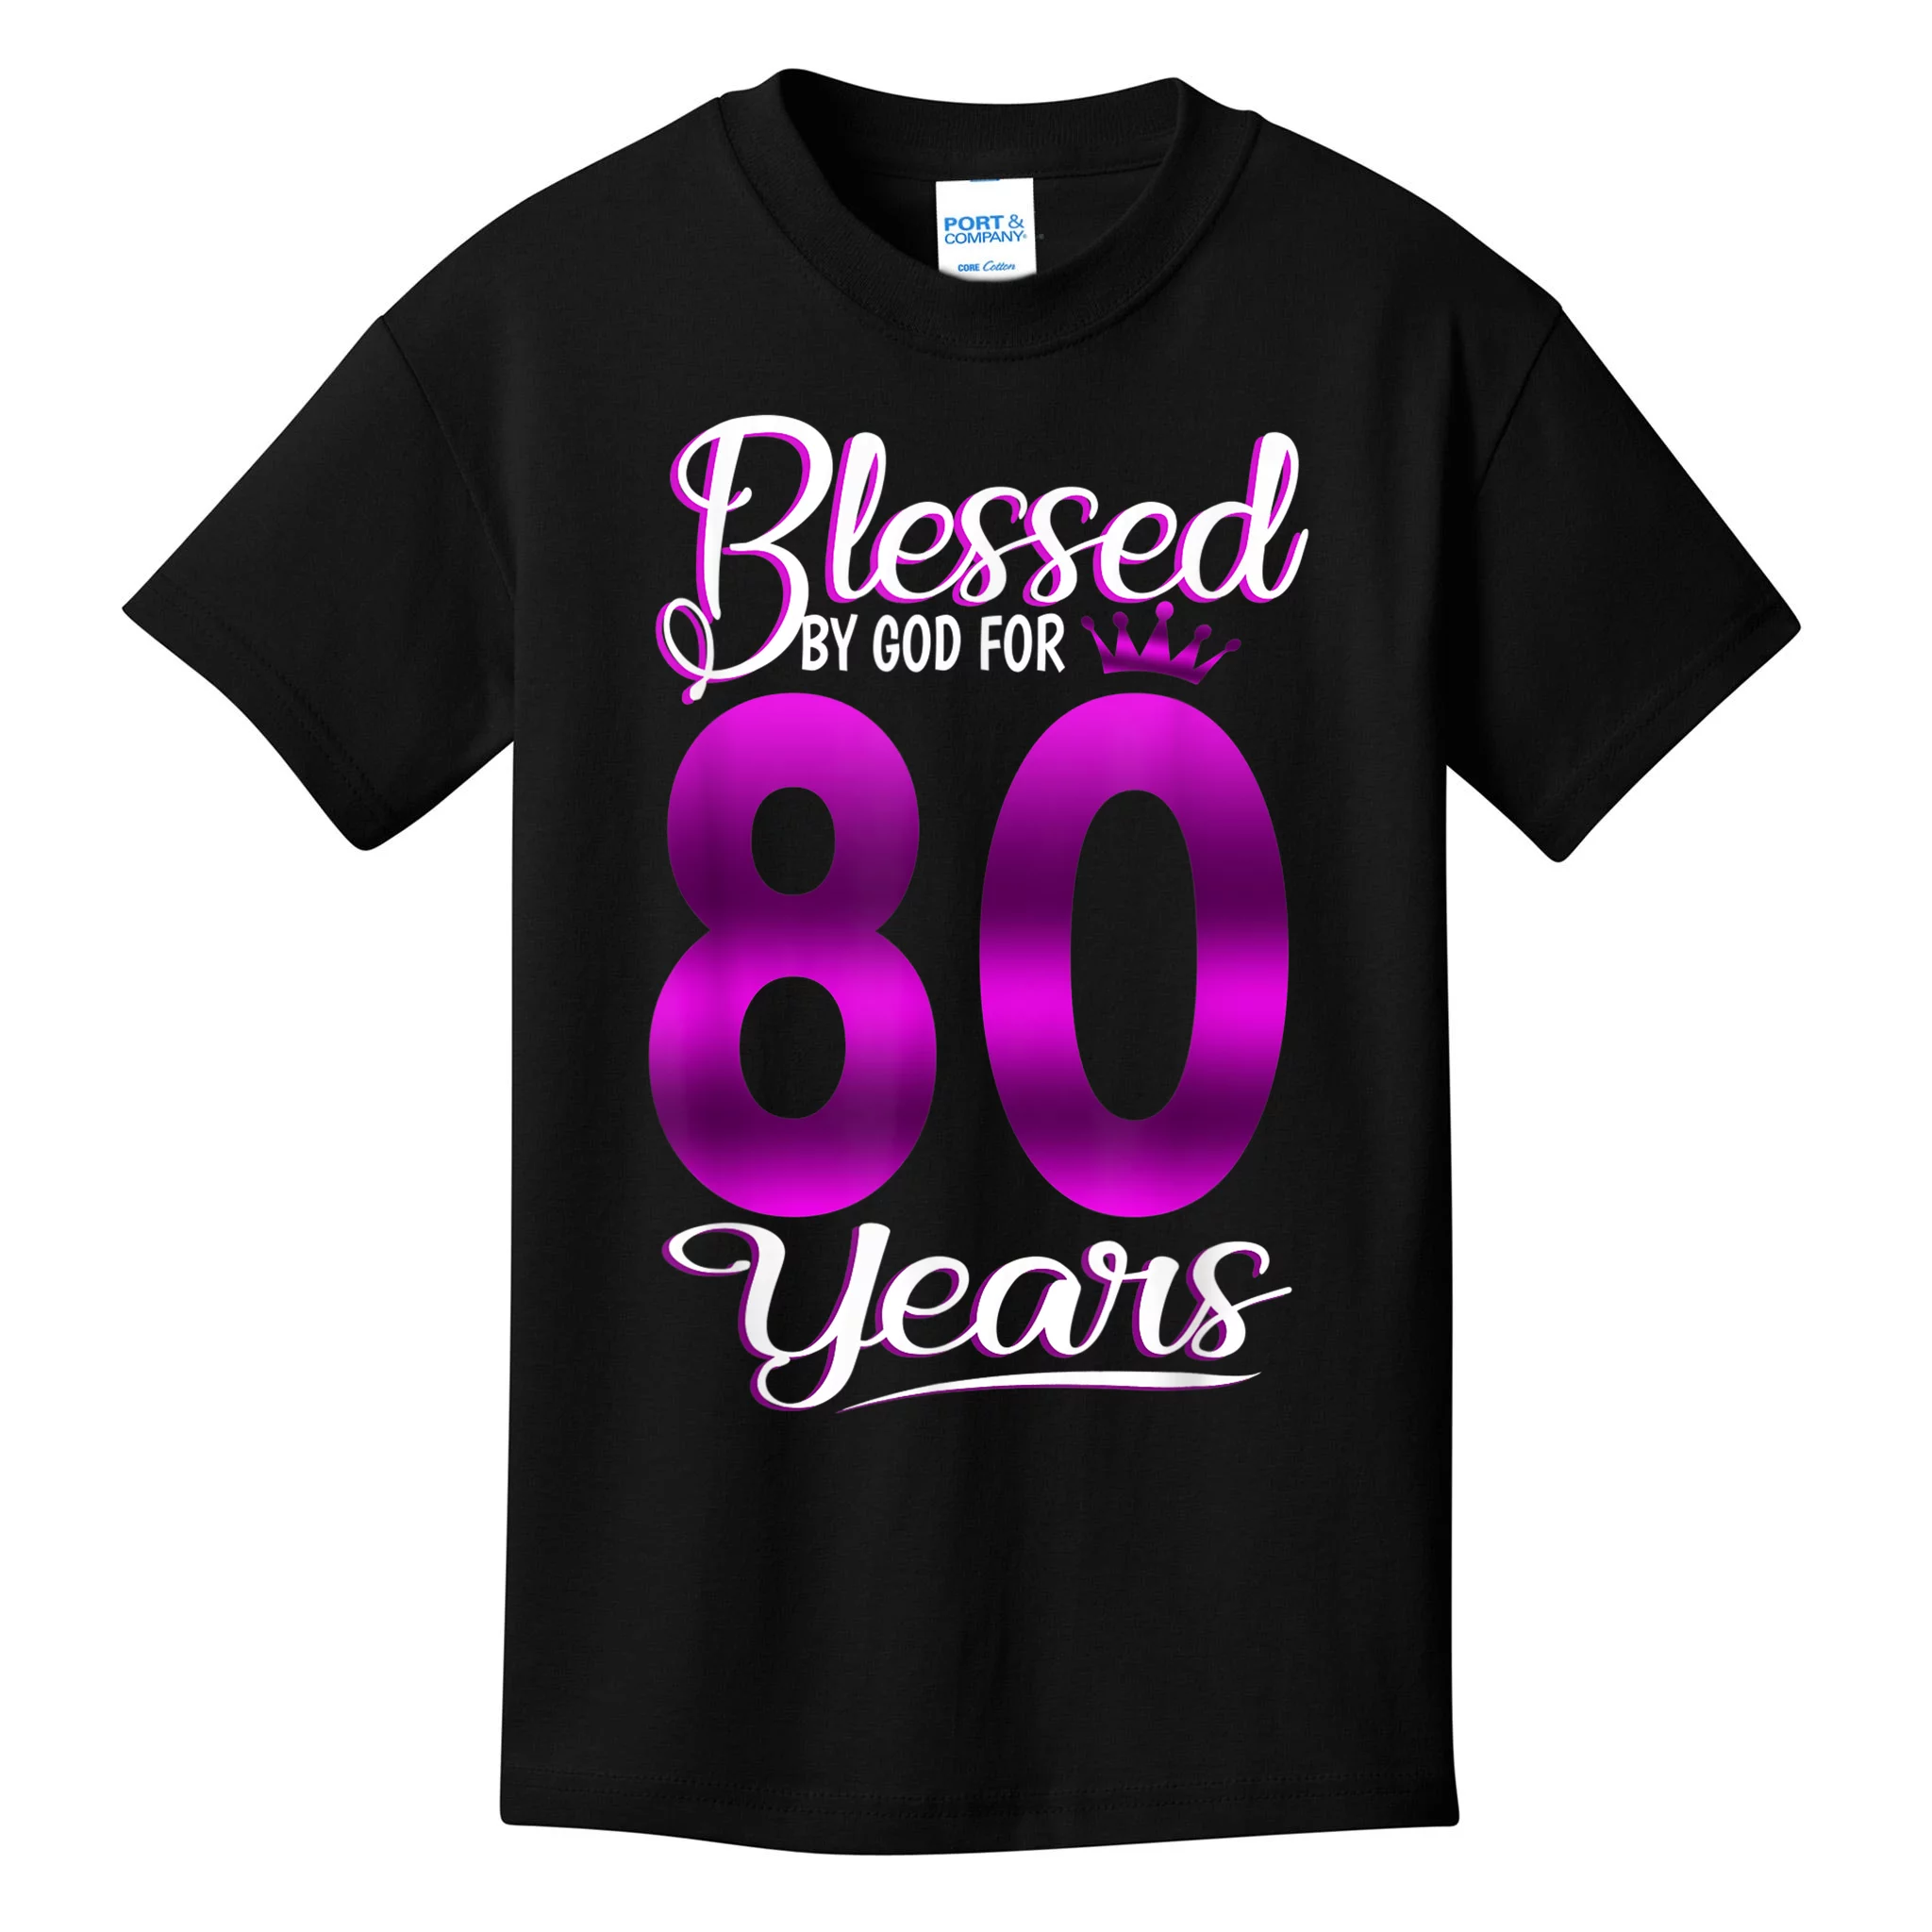 Buy 80th Birthday Gifts for Women Online at Low Prices in India - Amazon.in